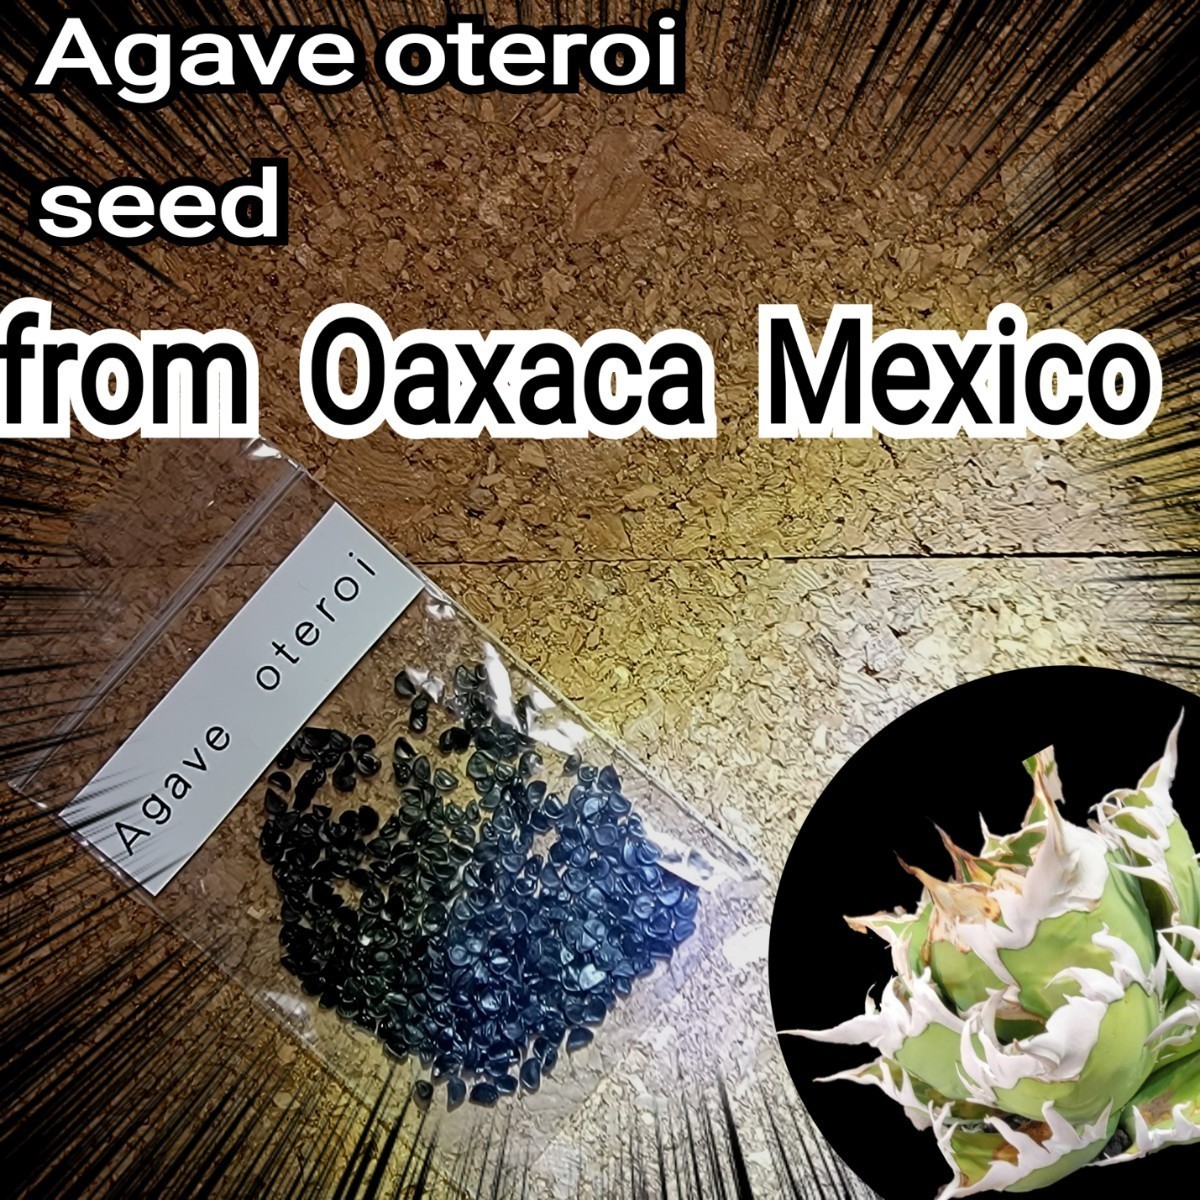  agave o terrorism i seeds [10 bead ] good .. carefuly selected or is ka Mexico production freshness. is good kind therefore germination proportion . high! certainly, real raw . Challenge please 